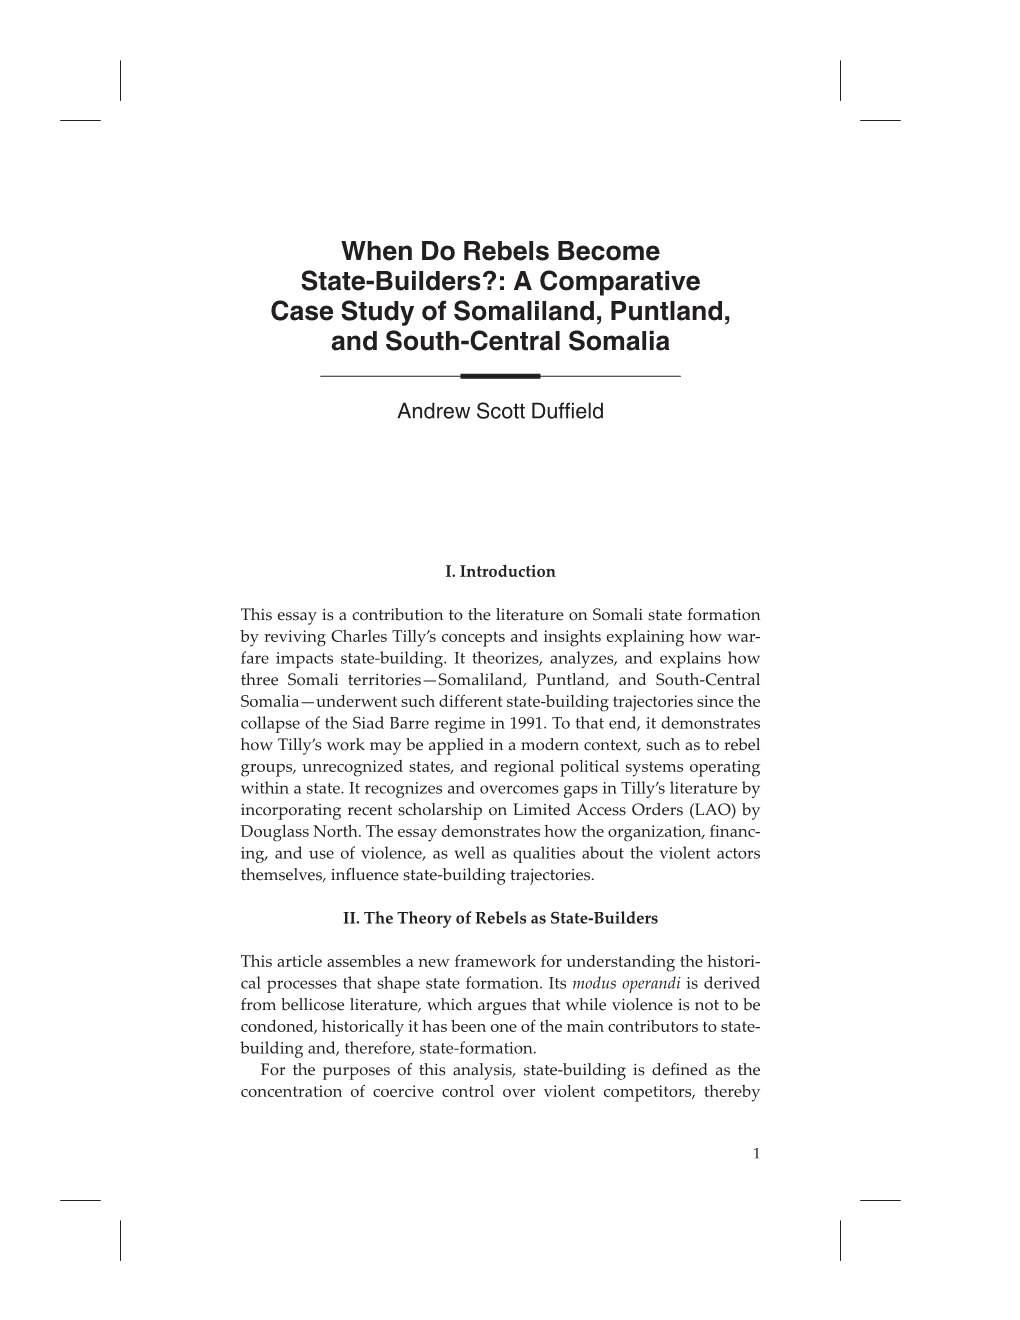 A Comparative Case Study of Somaliland, Puntland, and South-Central Somalia